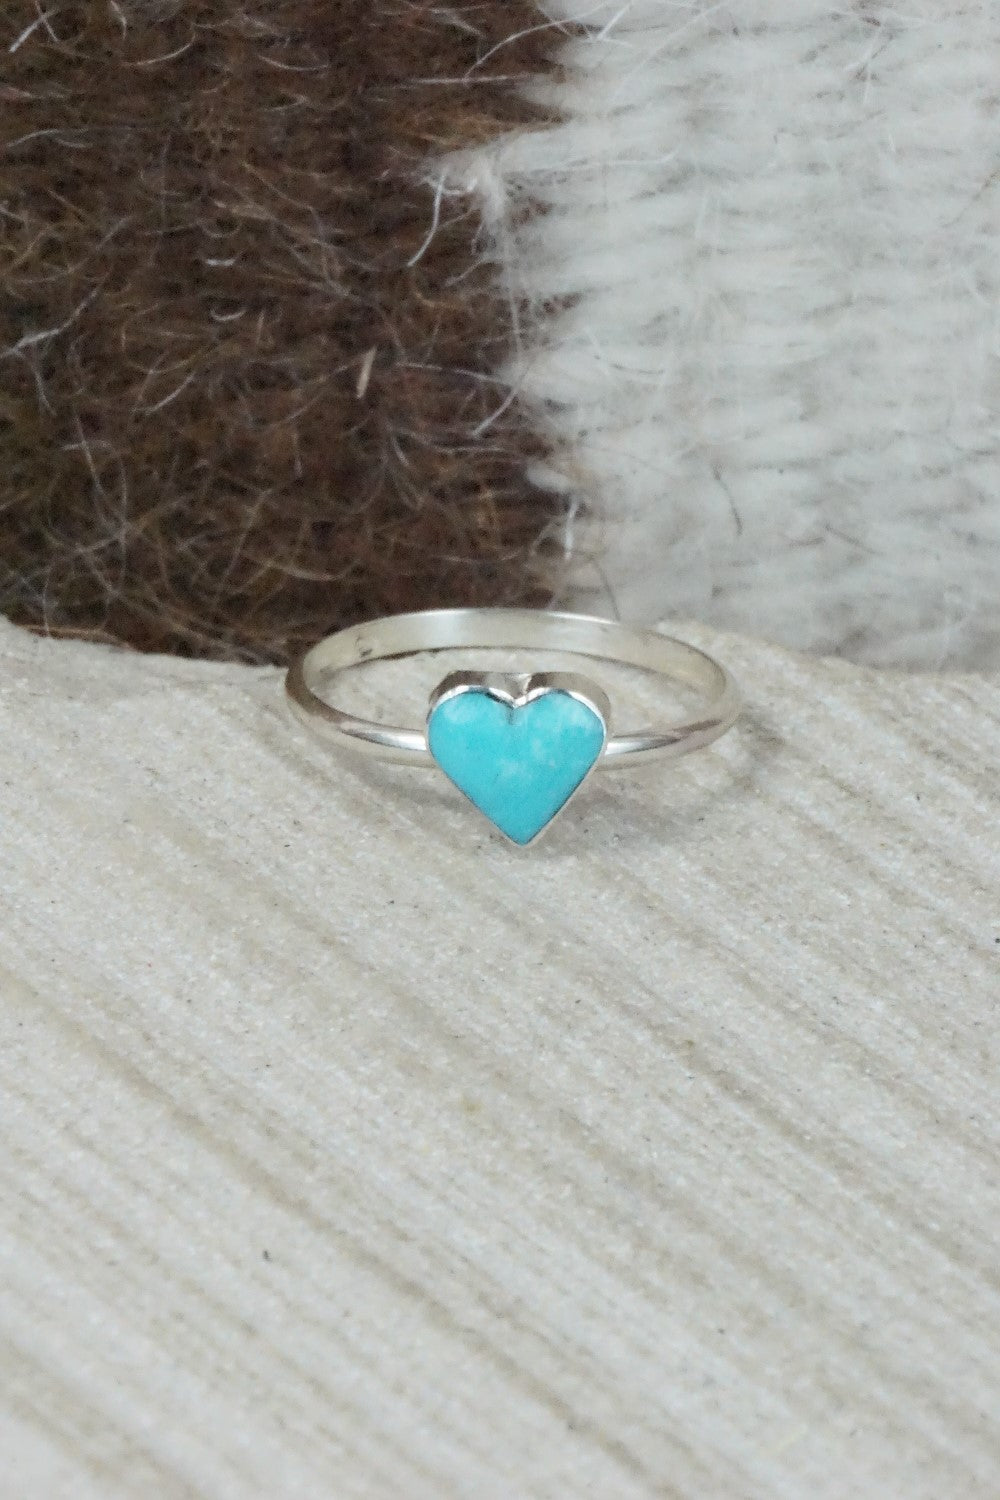 Turquoise & Sterling Silver Ring - A Lalio - Size 5.75